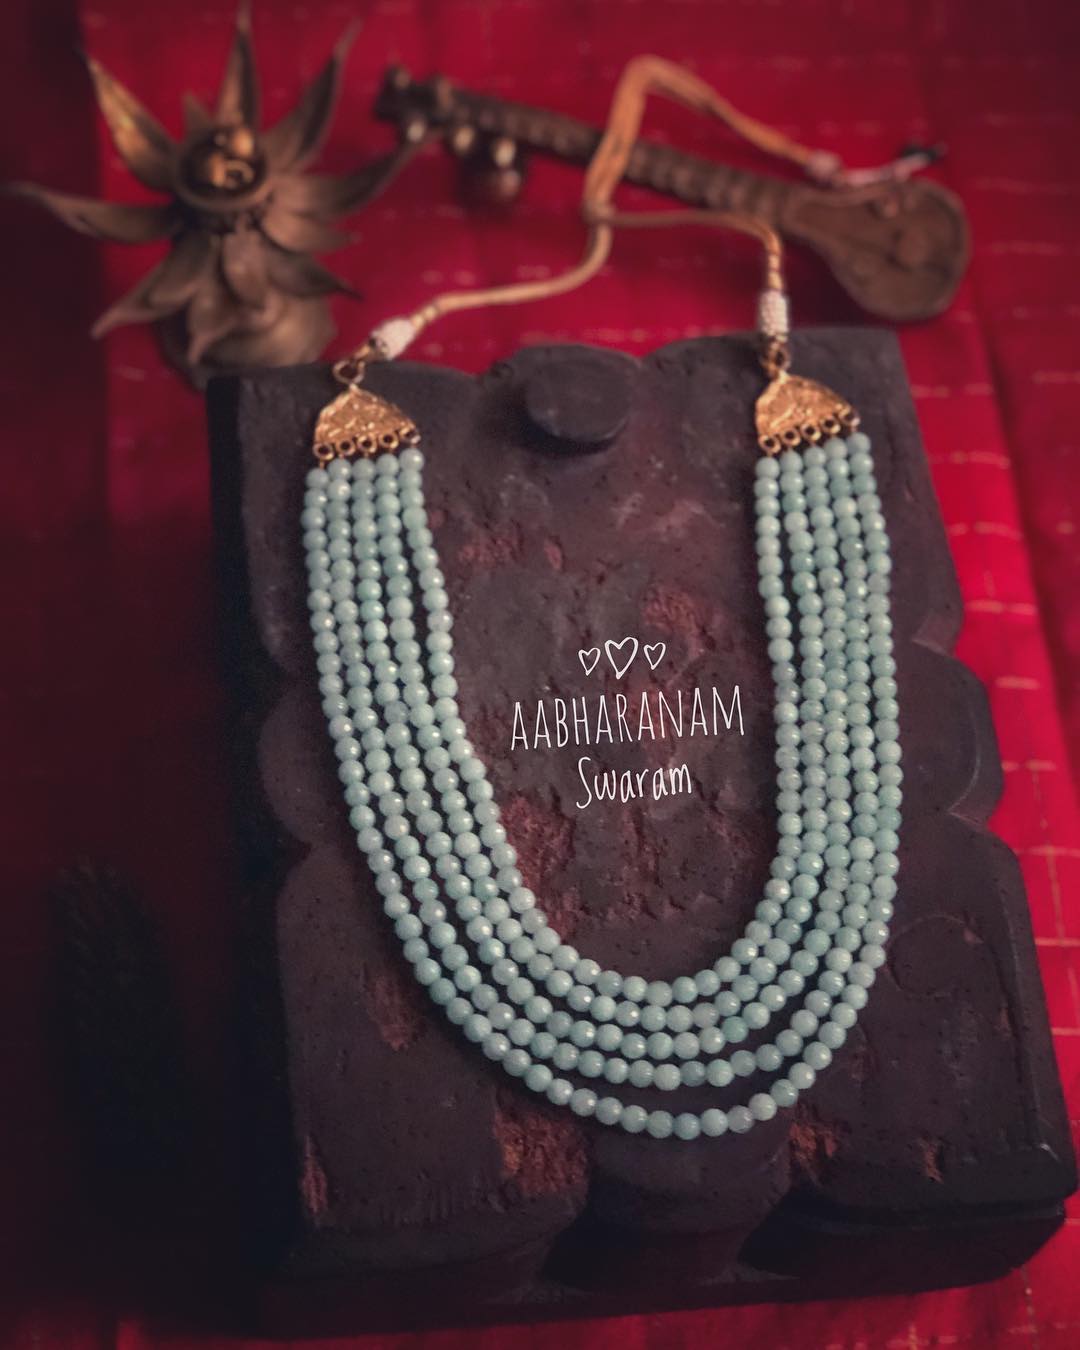 Classic Beaded Necklace From Abharanam